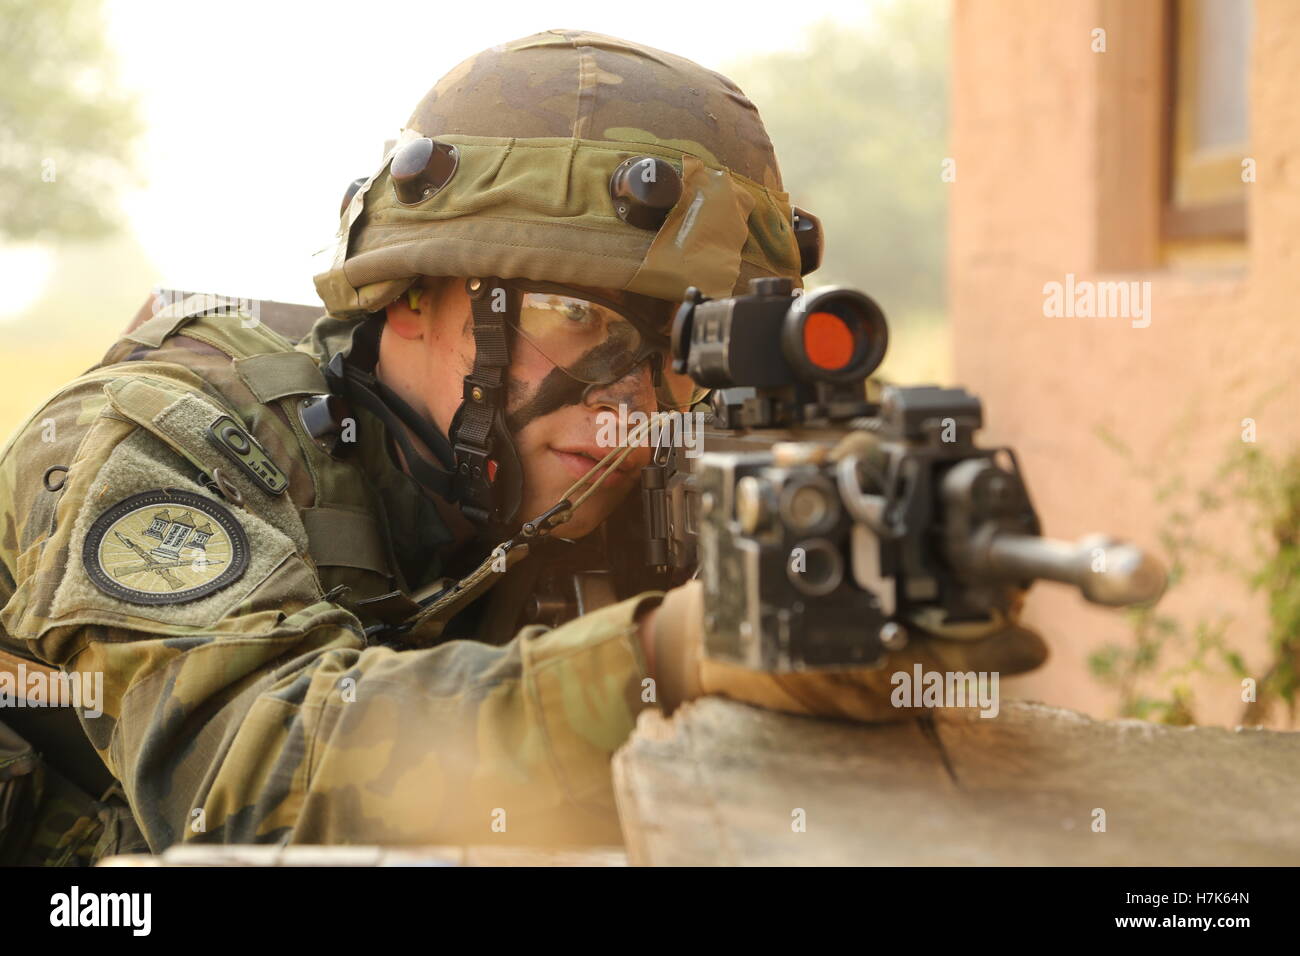 A Czech soldier looks through his gun sight during exercise Allied Spirit II simulated town assault training at the U.S. Army Joint Multinational Readiness Center August 14, 2015 in Hohenfels, Germany. Stock Photo